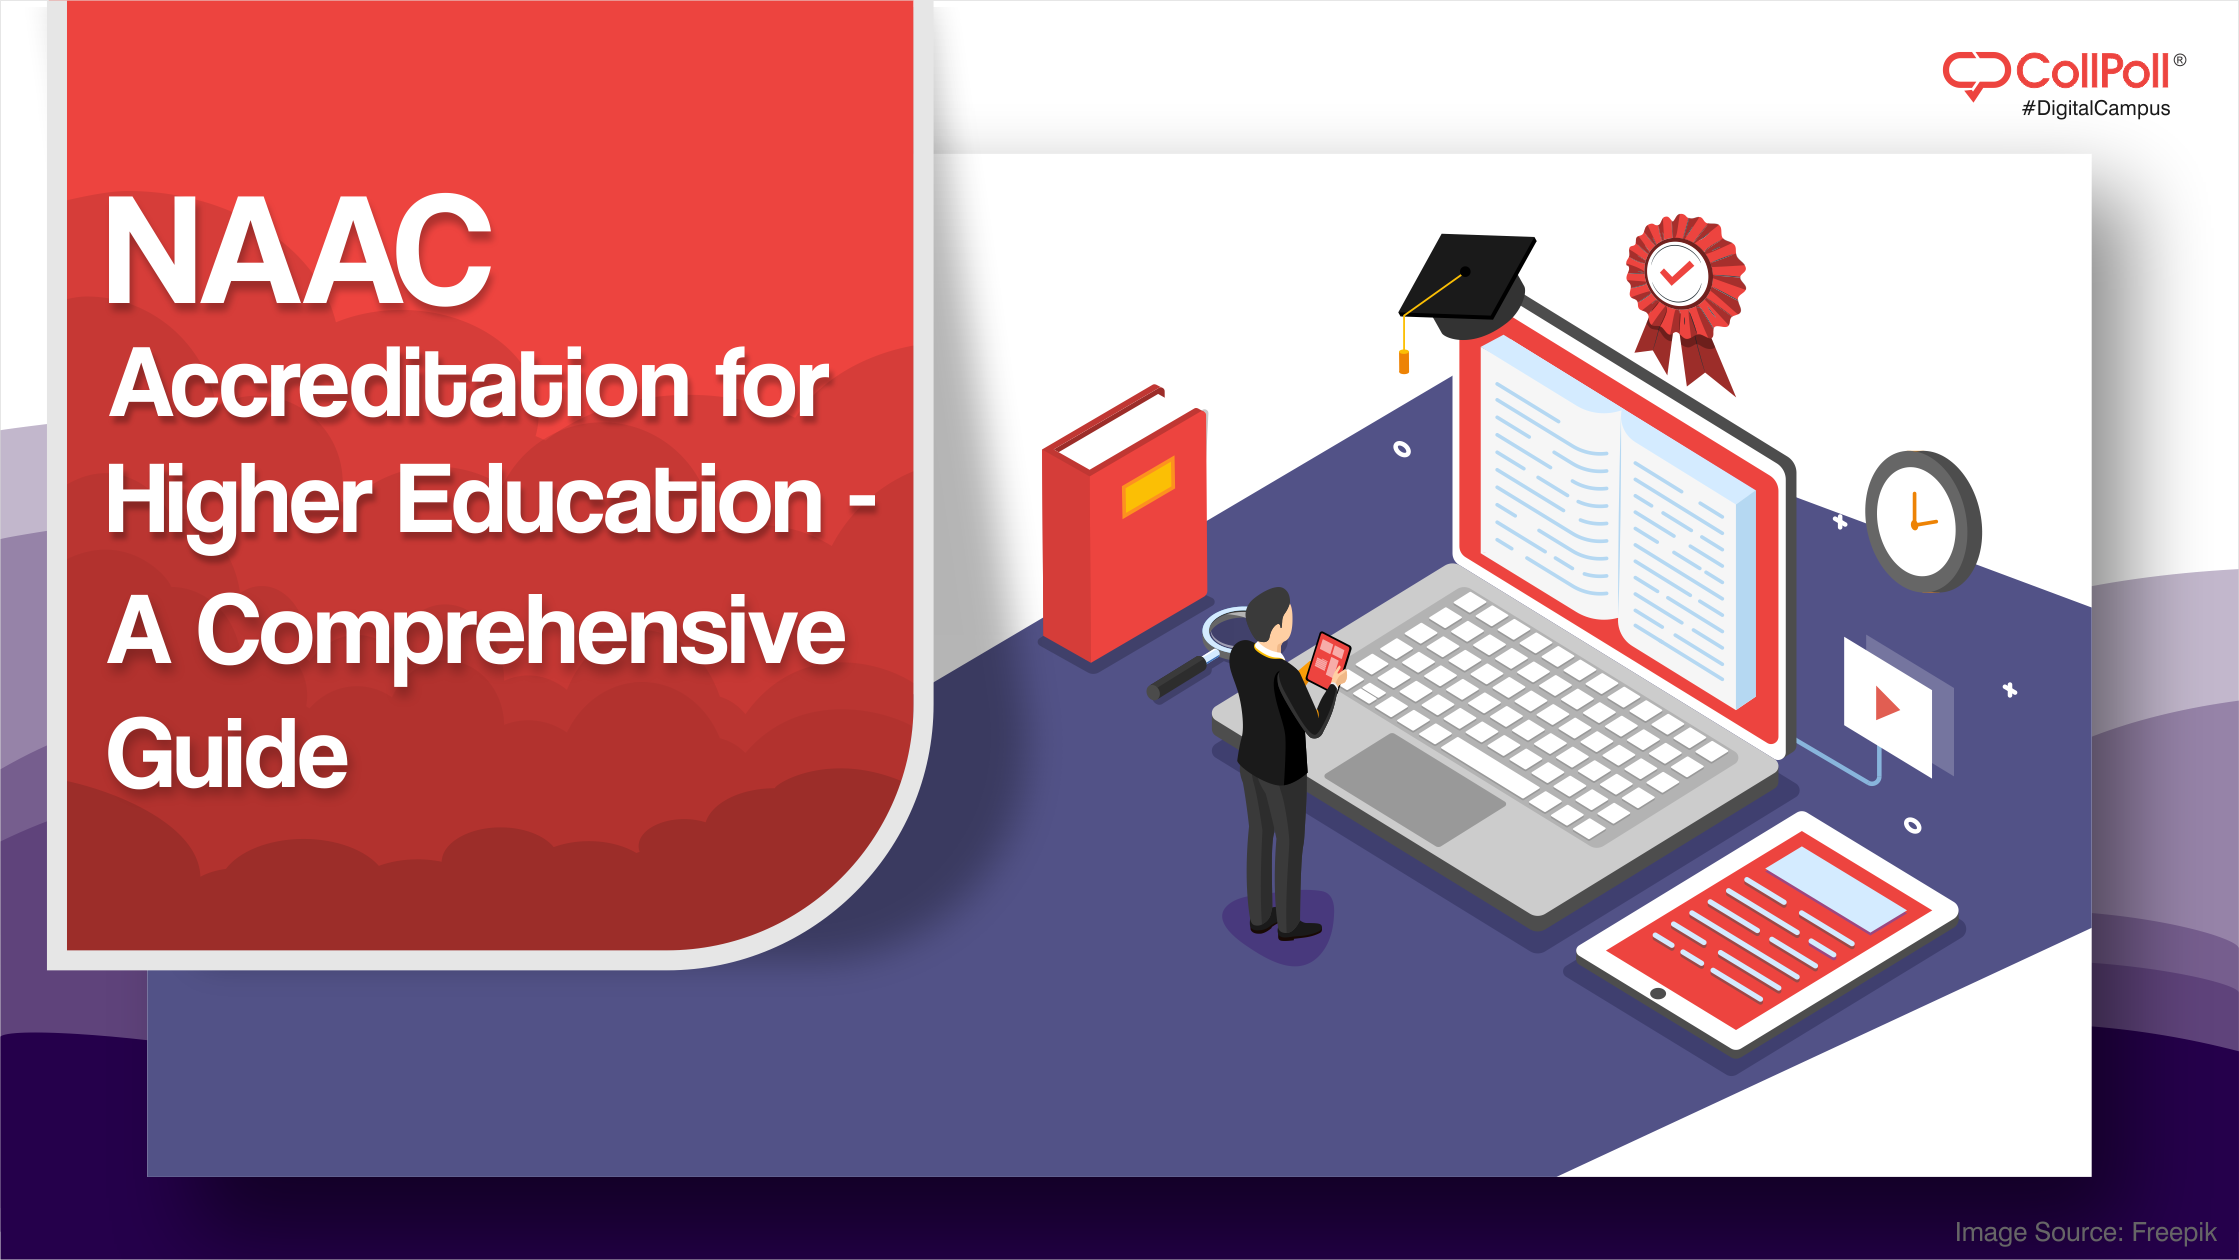 NAAC Accreditation for Higher Education - A Comprehensive Guide